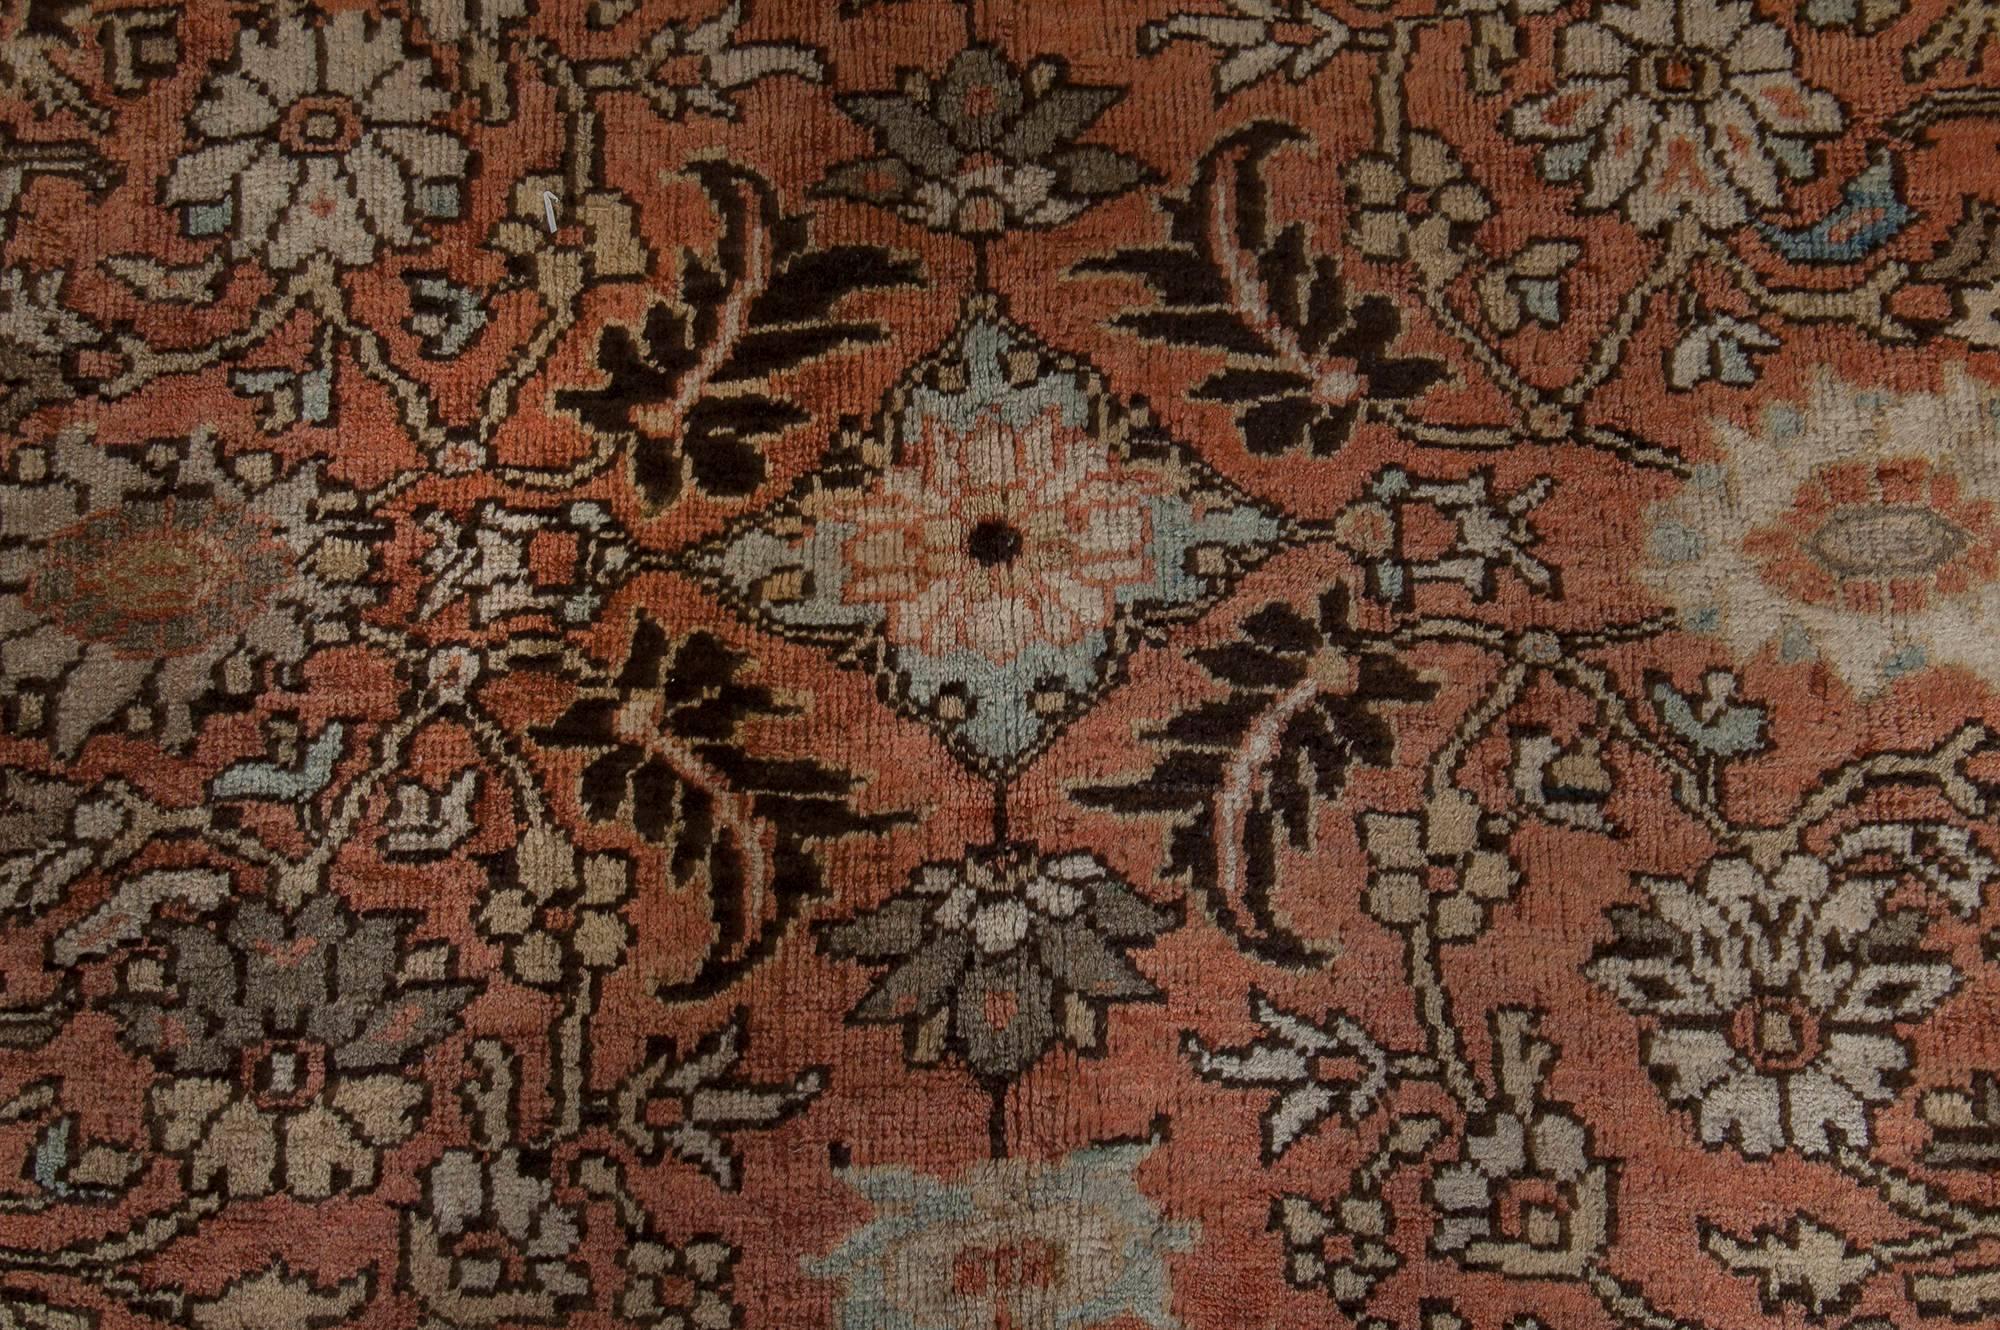 Antique Sultanabad brown rug
Size: 13'0